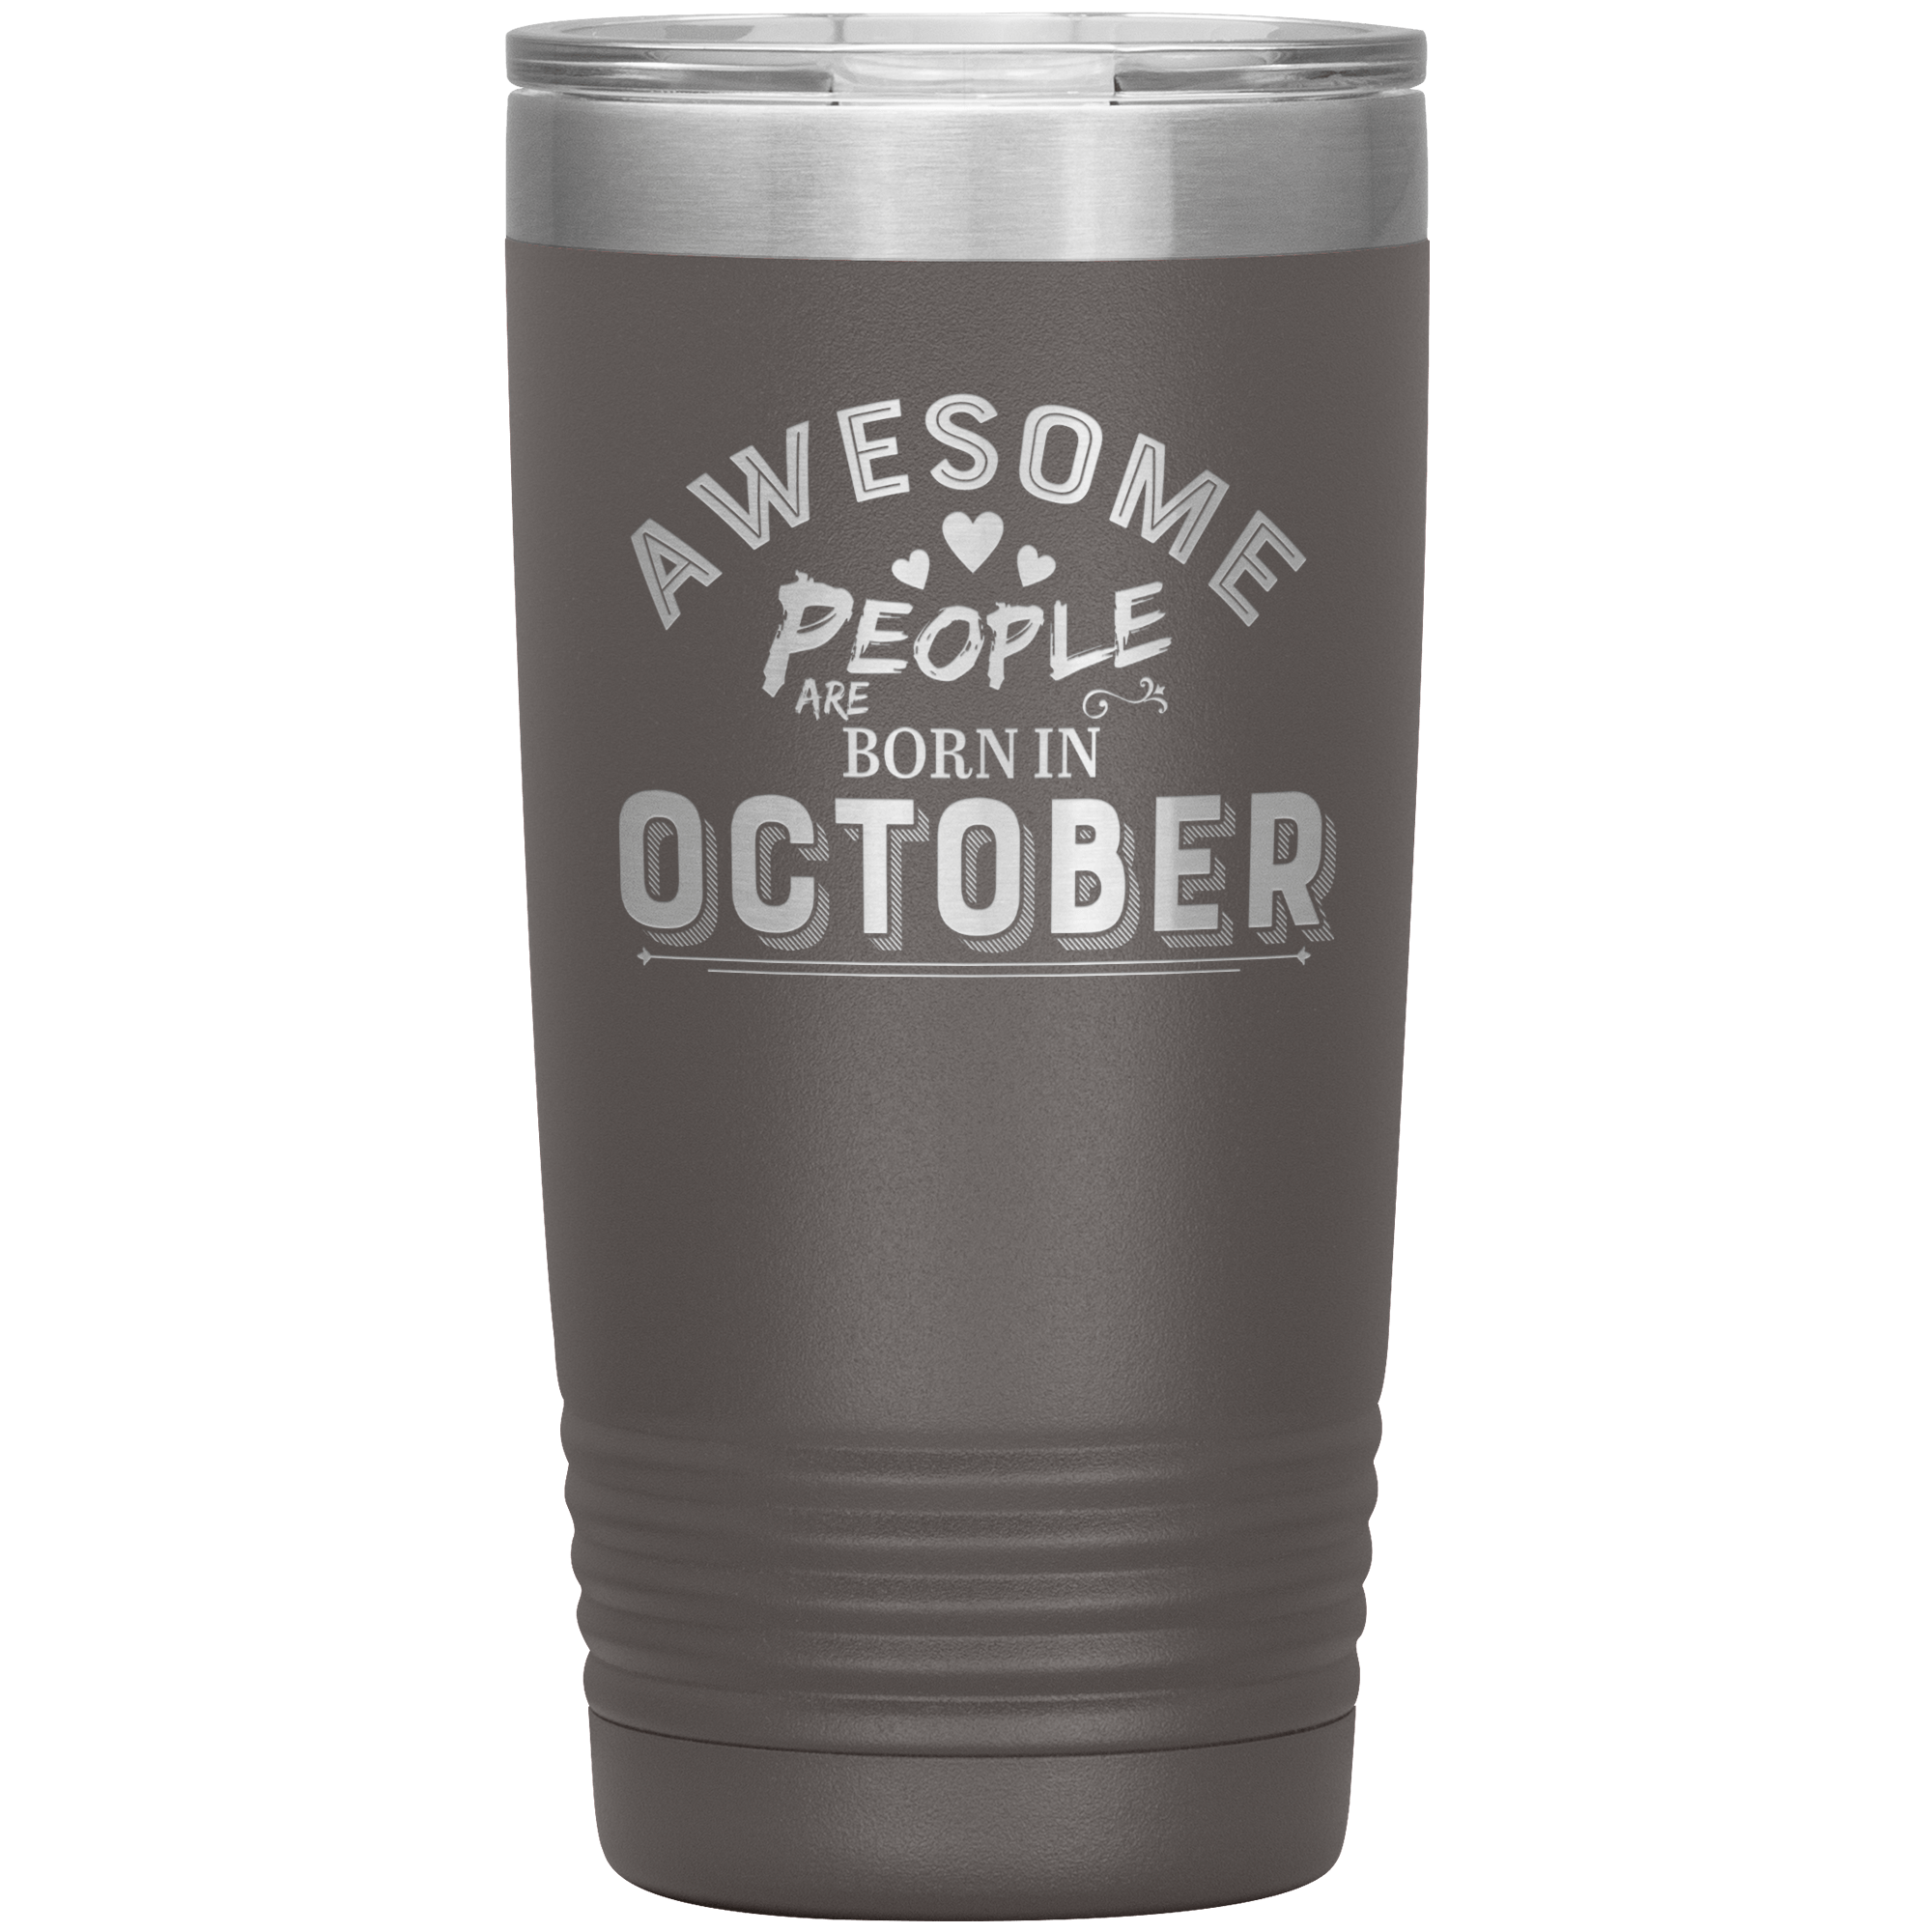 "AWESOME PEOPLE ARE BORN IN OCTOBER" Tumbler